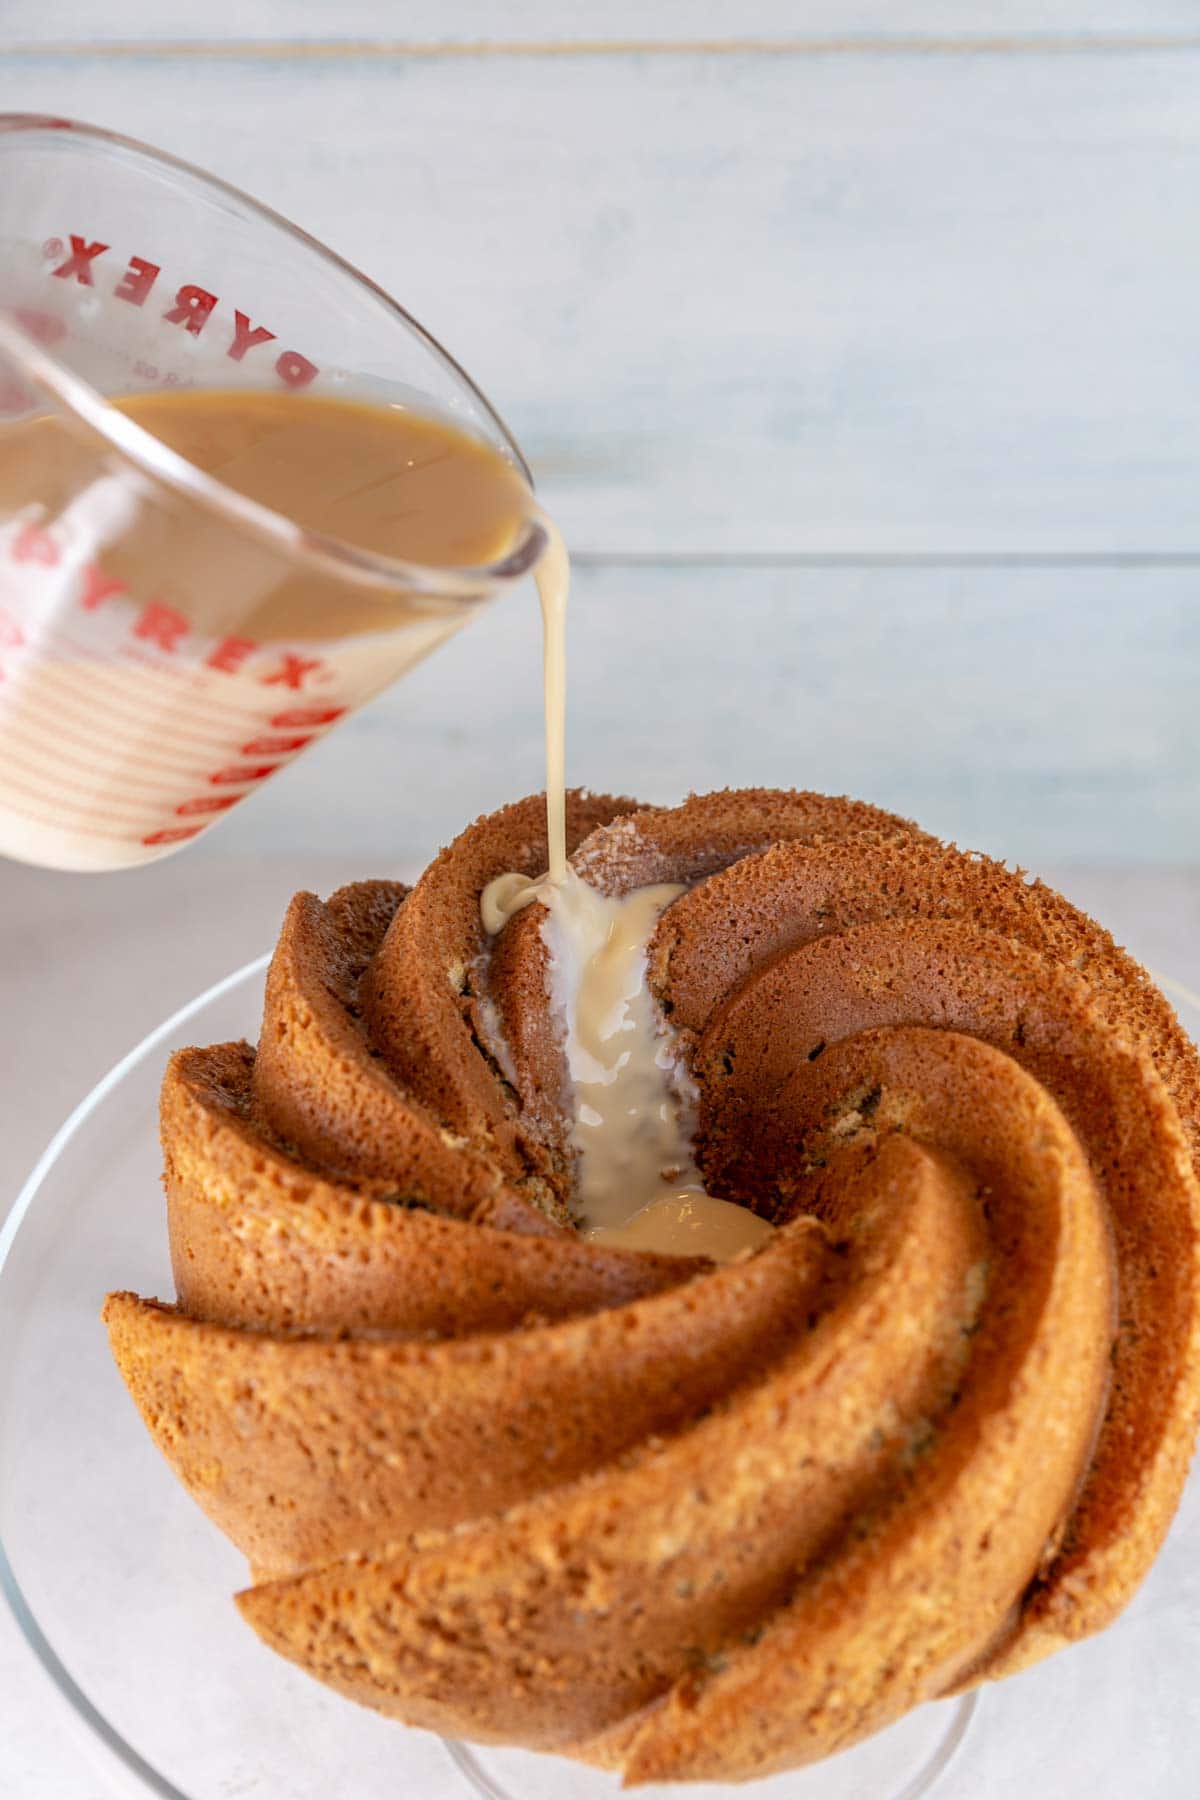 pouring a tres leches milk mixture from a measuring cup onto a bundt cake